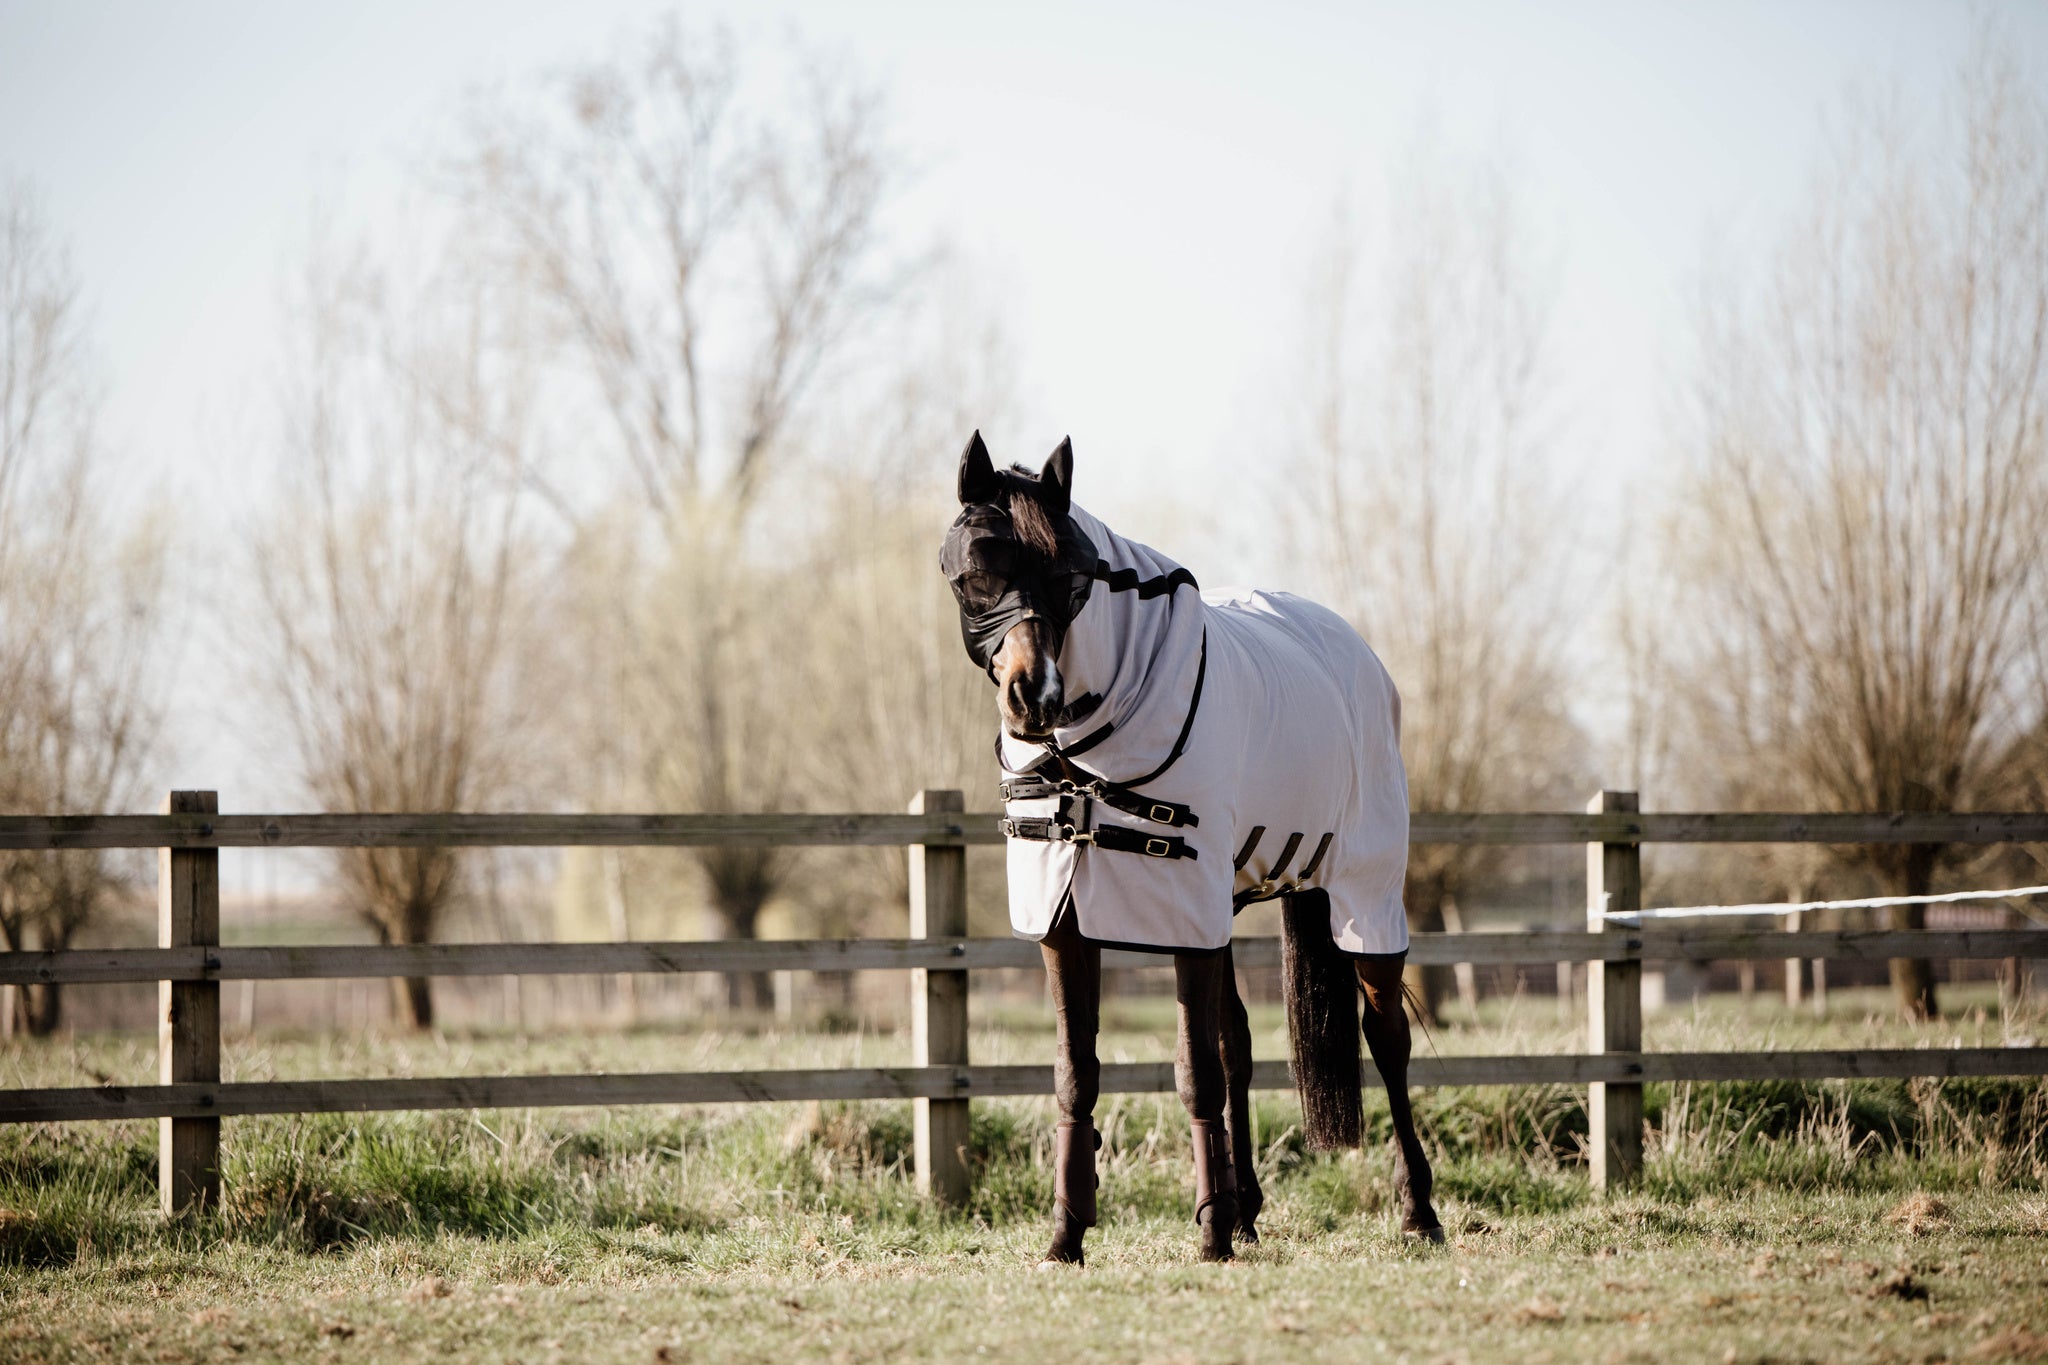 Get rid of any irritations caused by insects with the Kentucky Mesh Fly Rug.